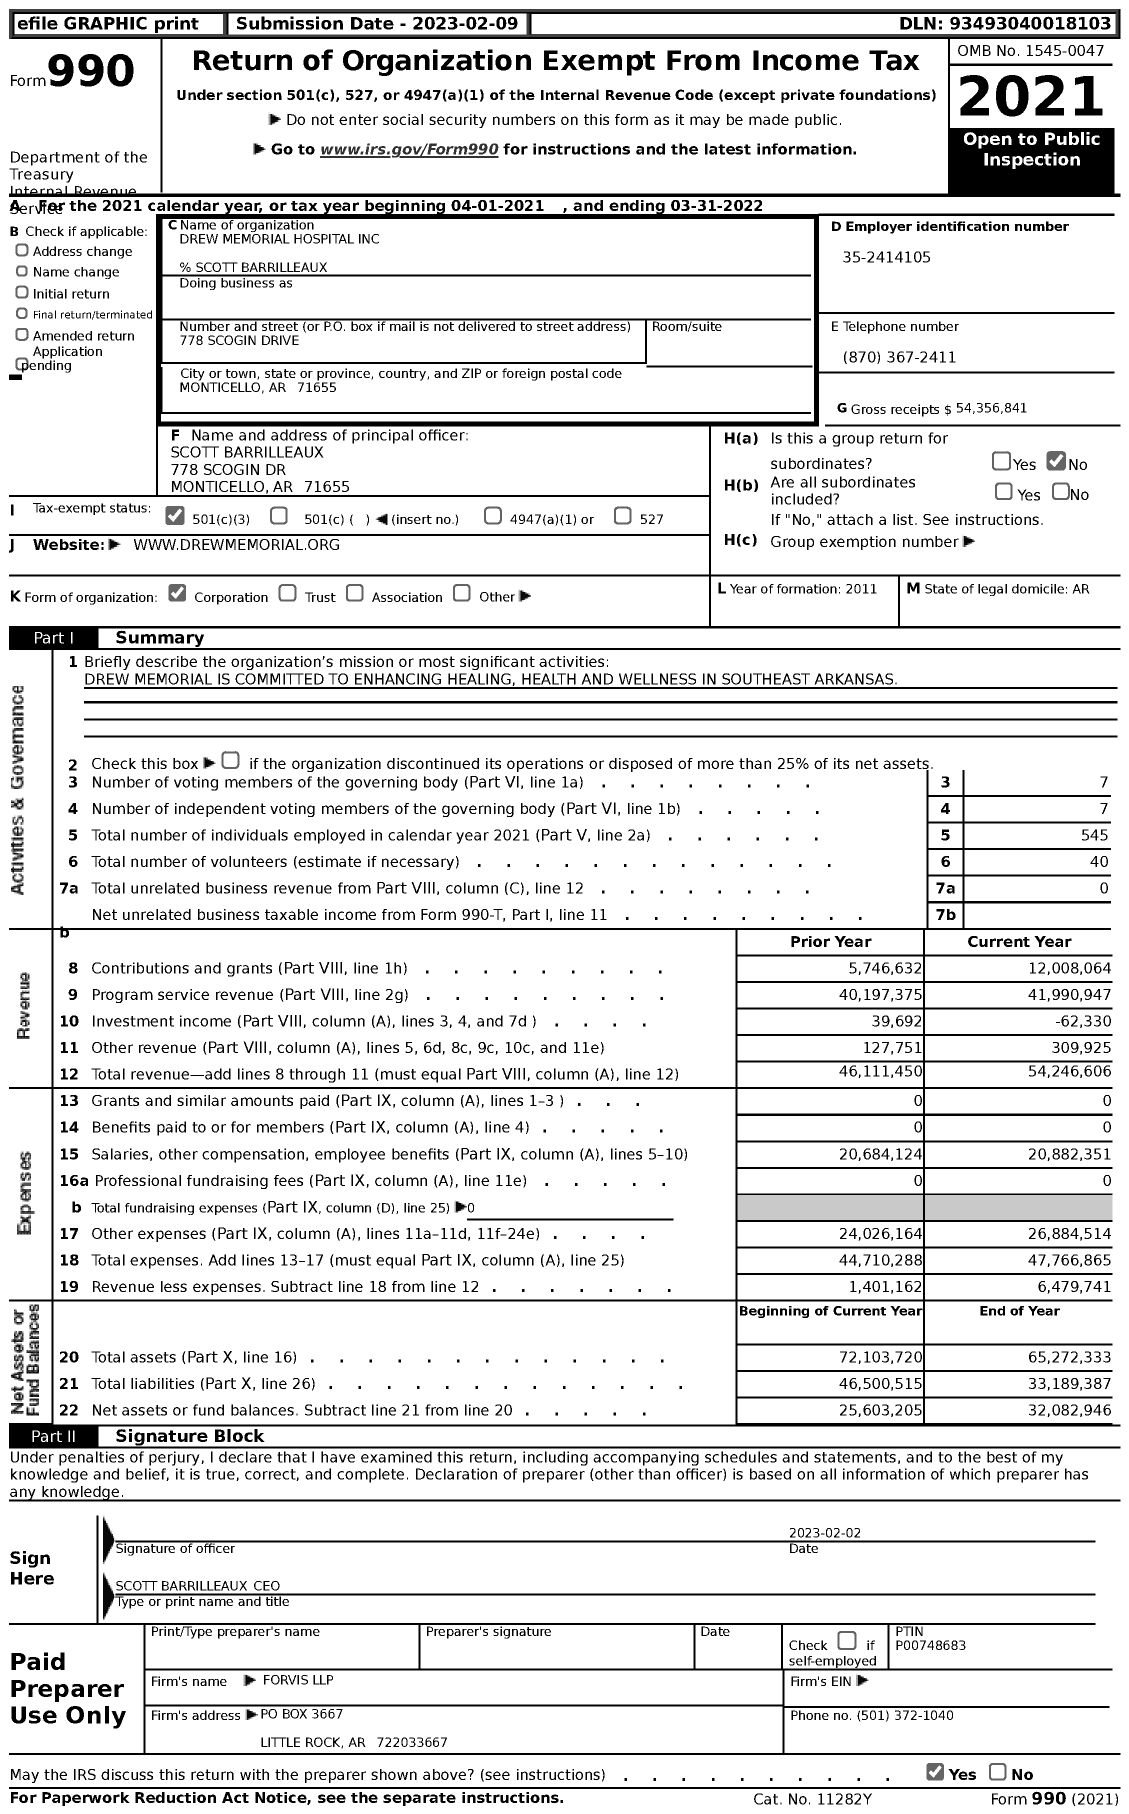 Image of first page of 2021 Form 990 for Drew Memorial Health System (DMH)